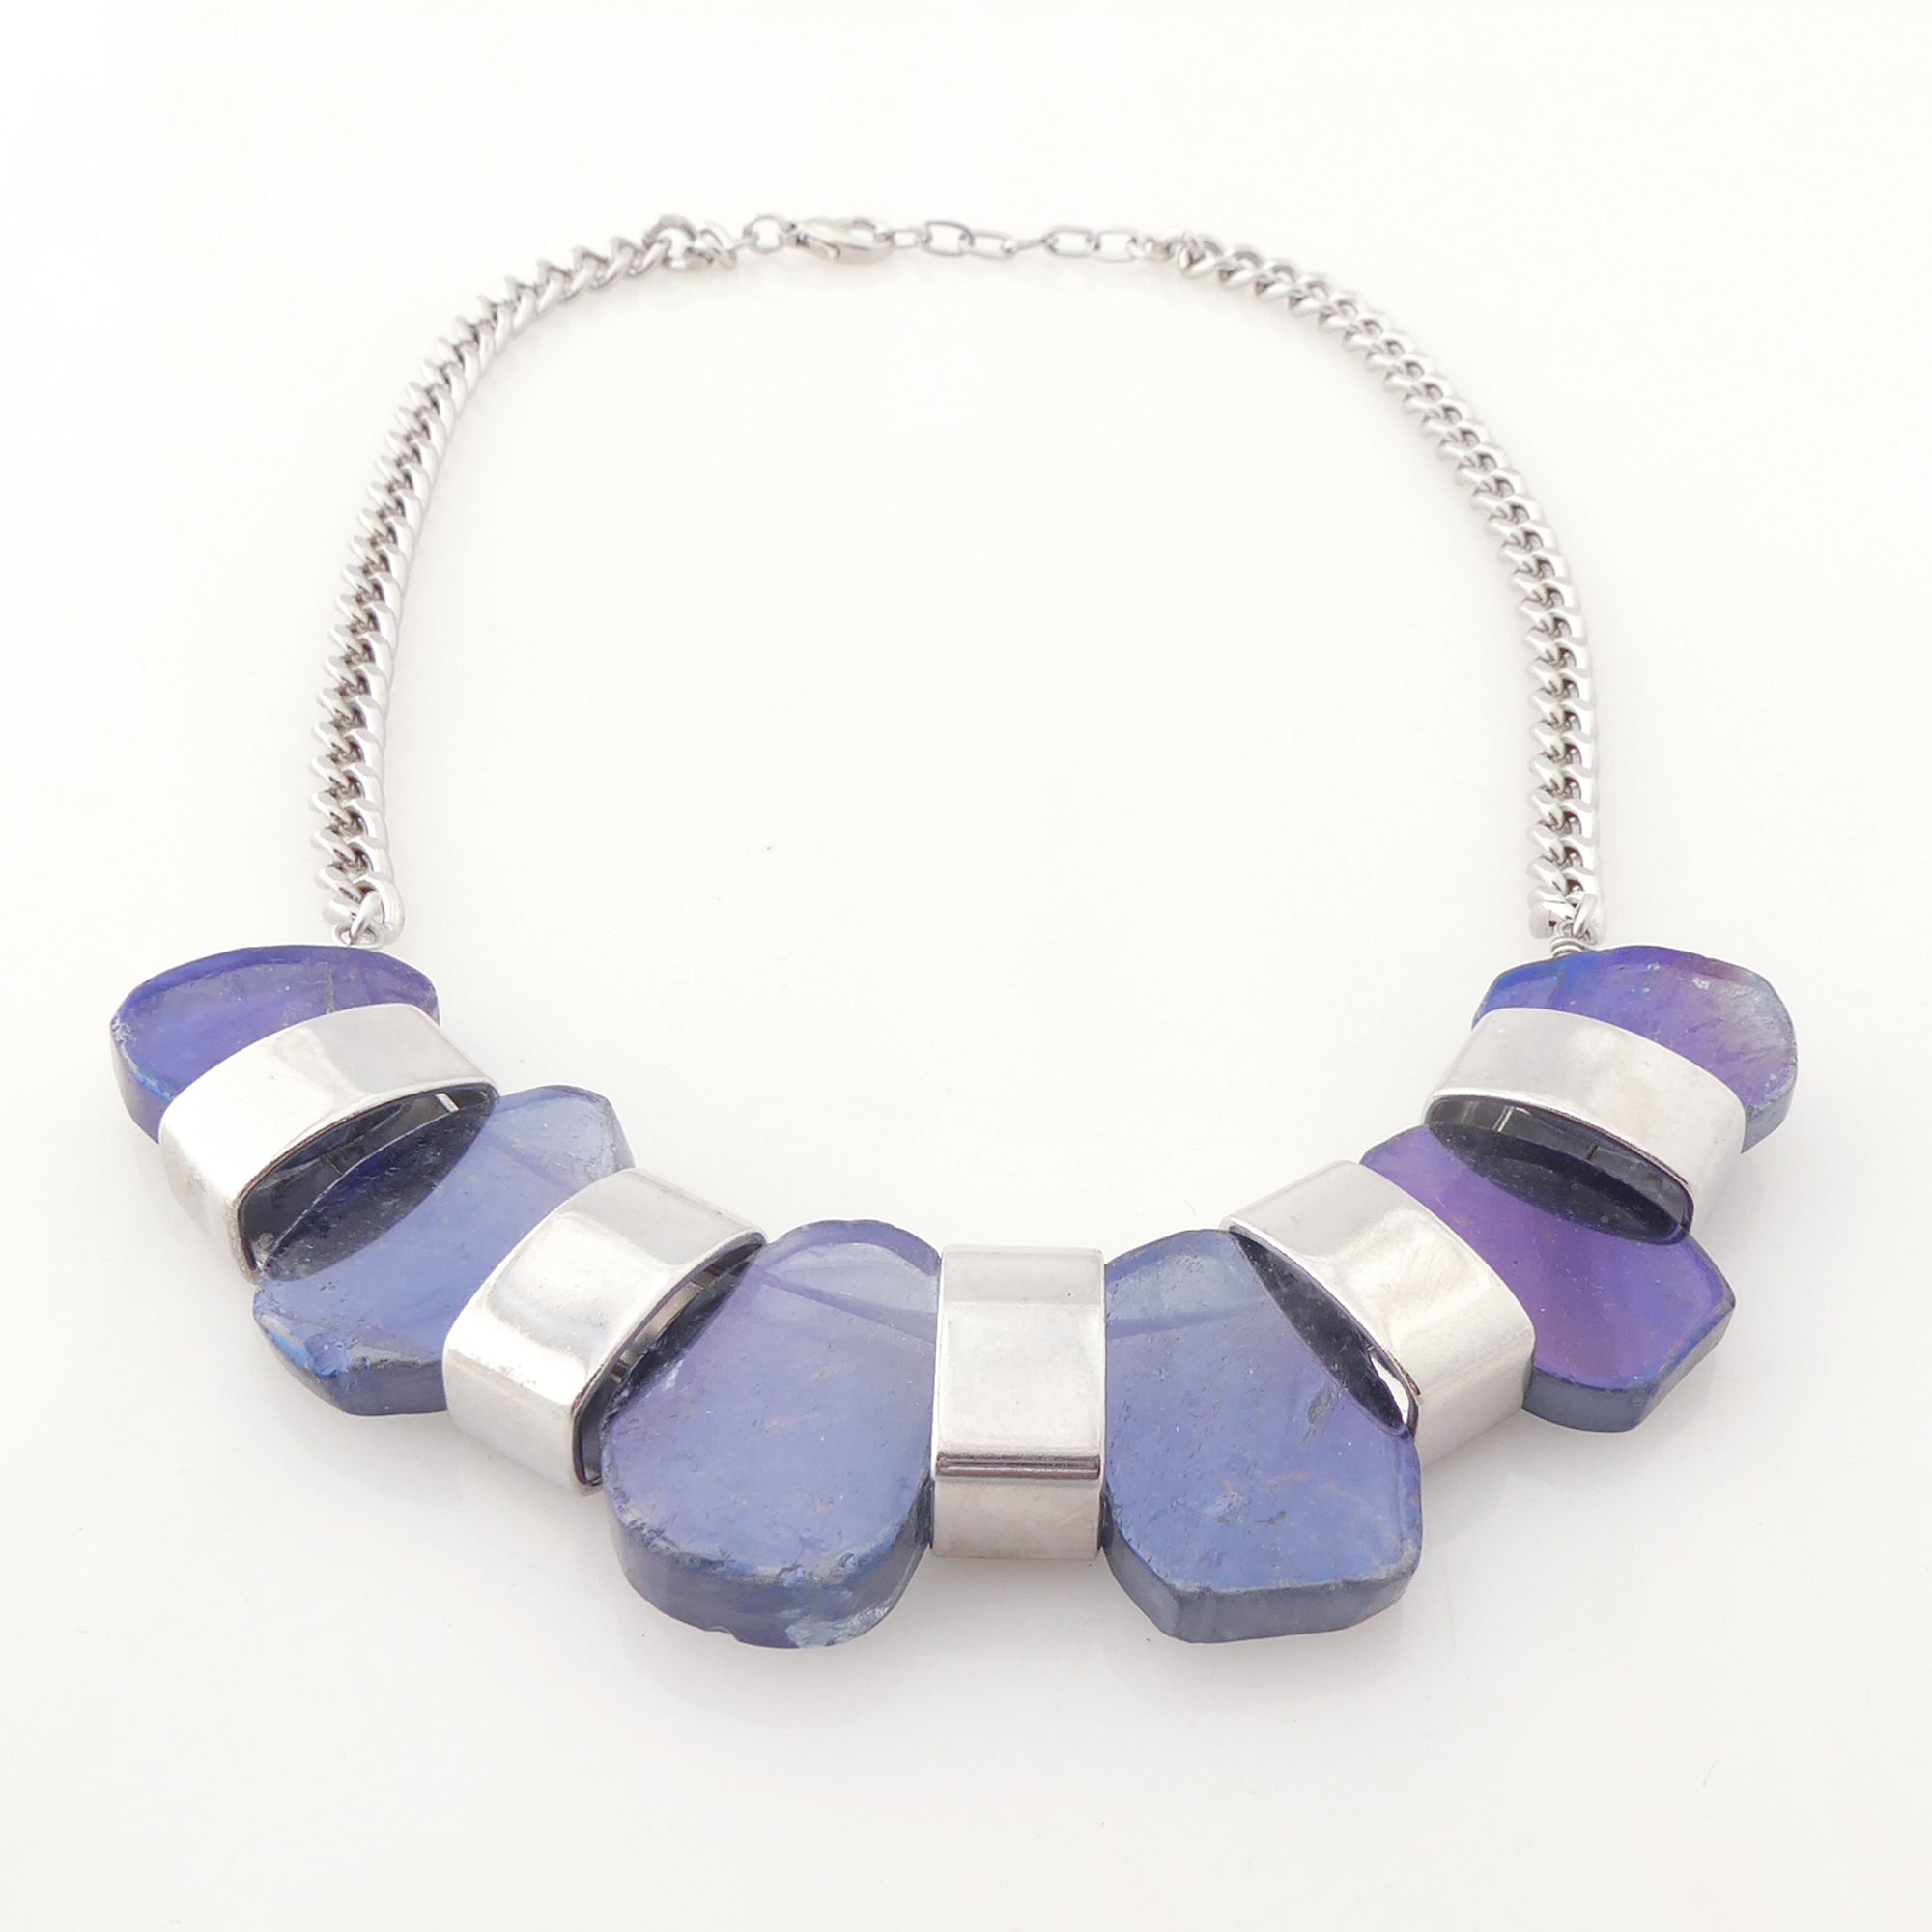 Iridescent blue agate necklace by Jenny Dayco 3